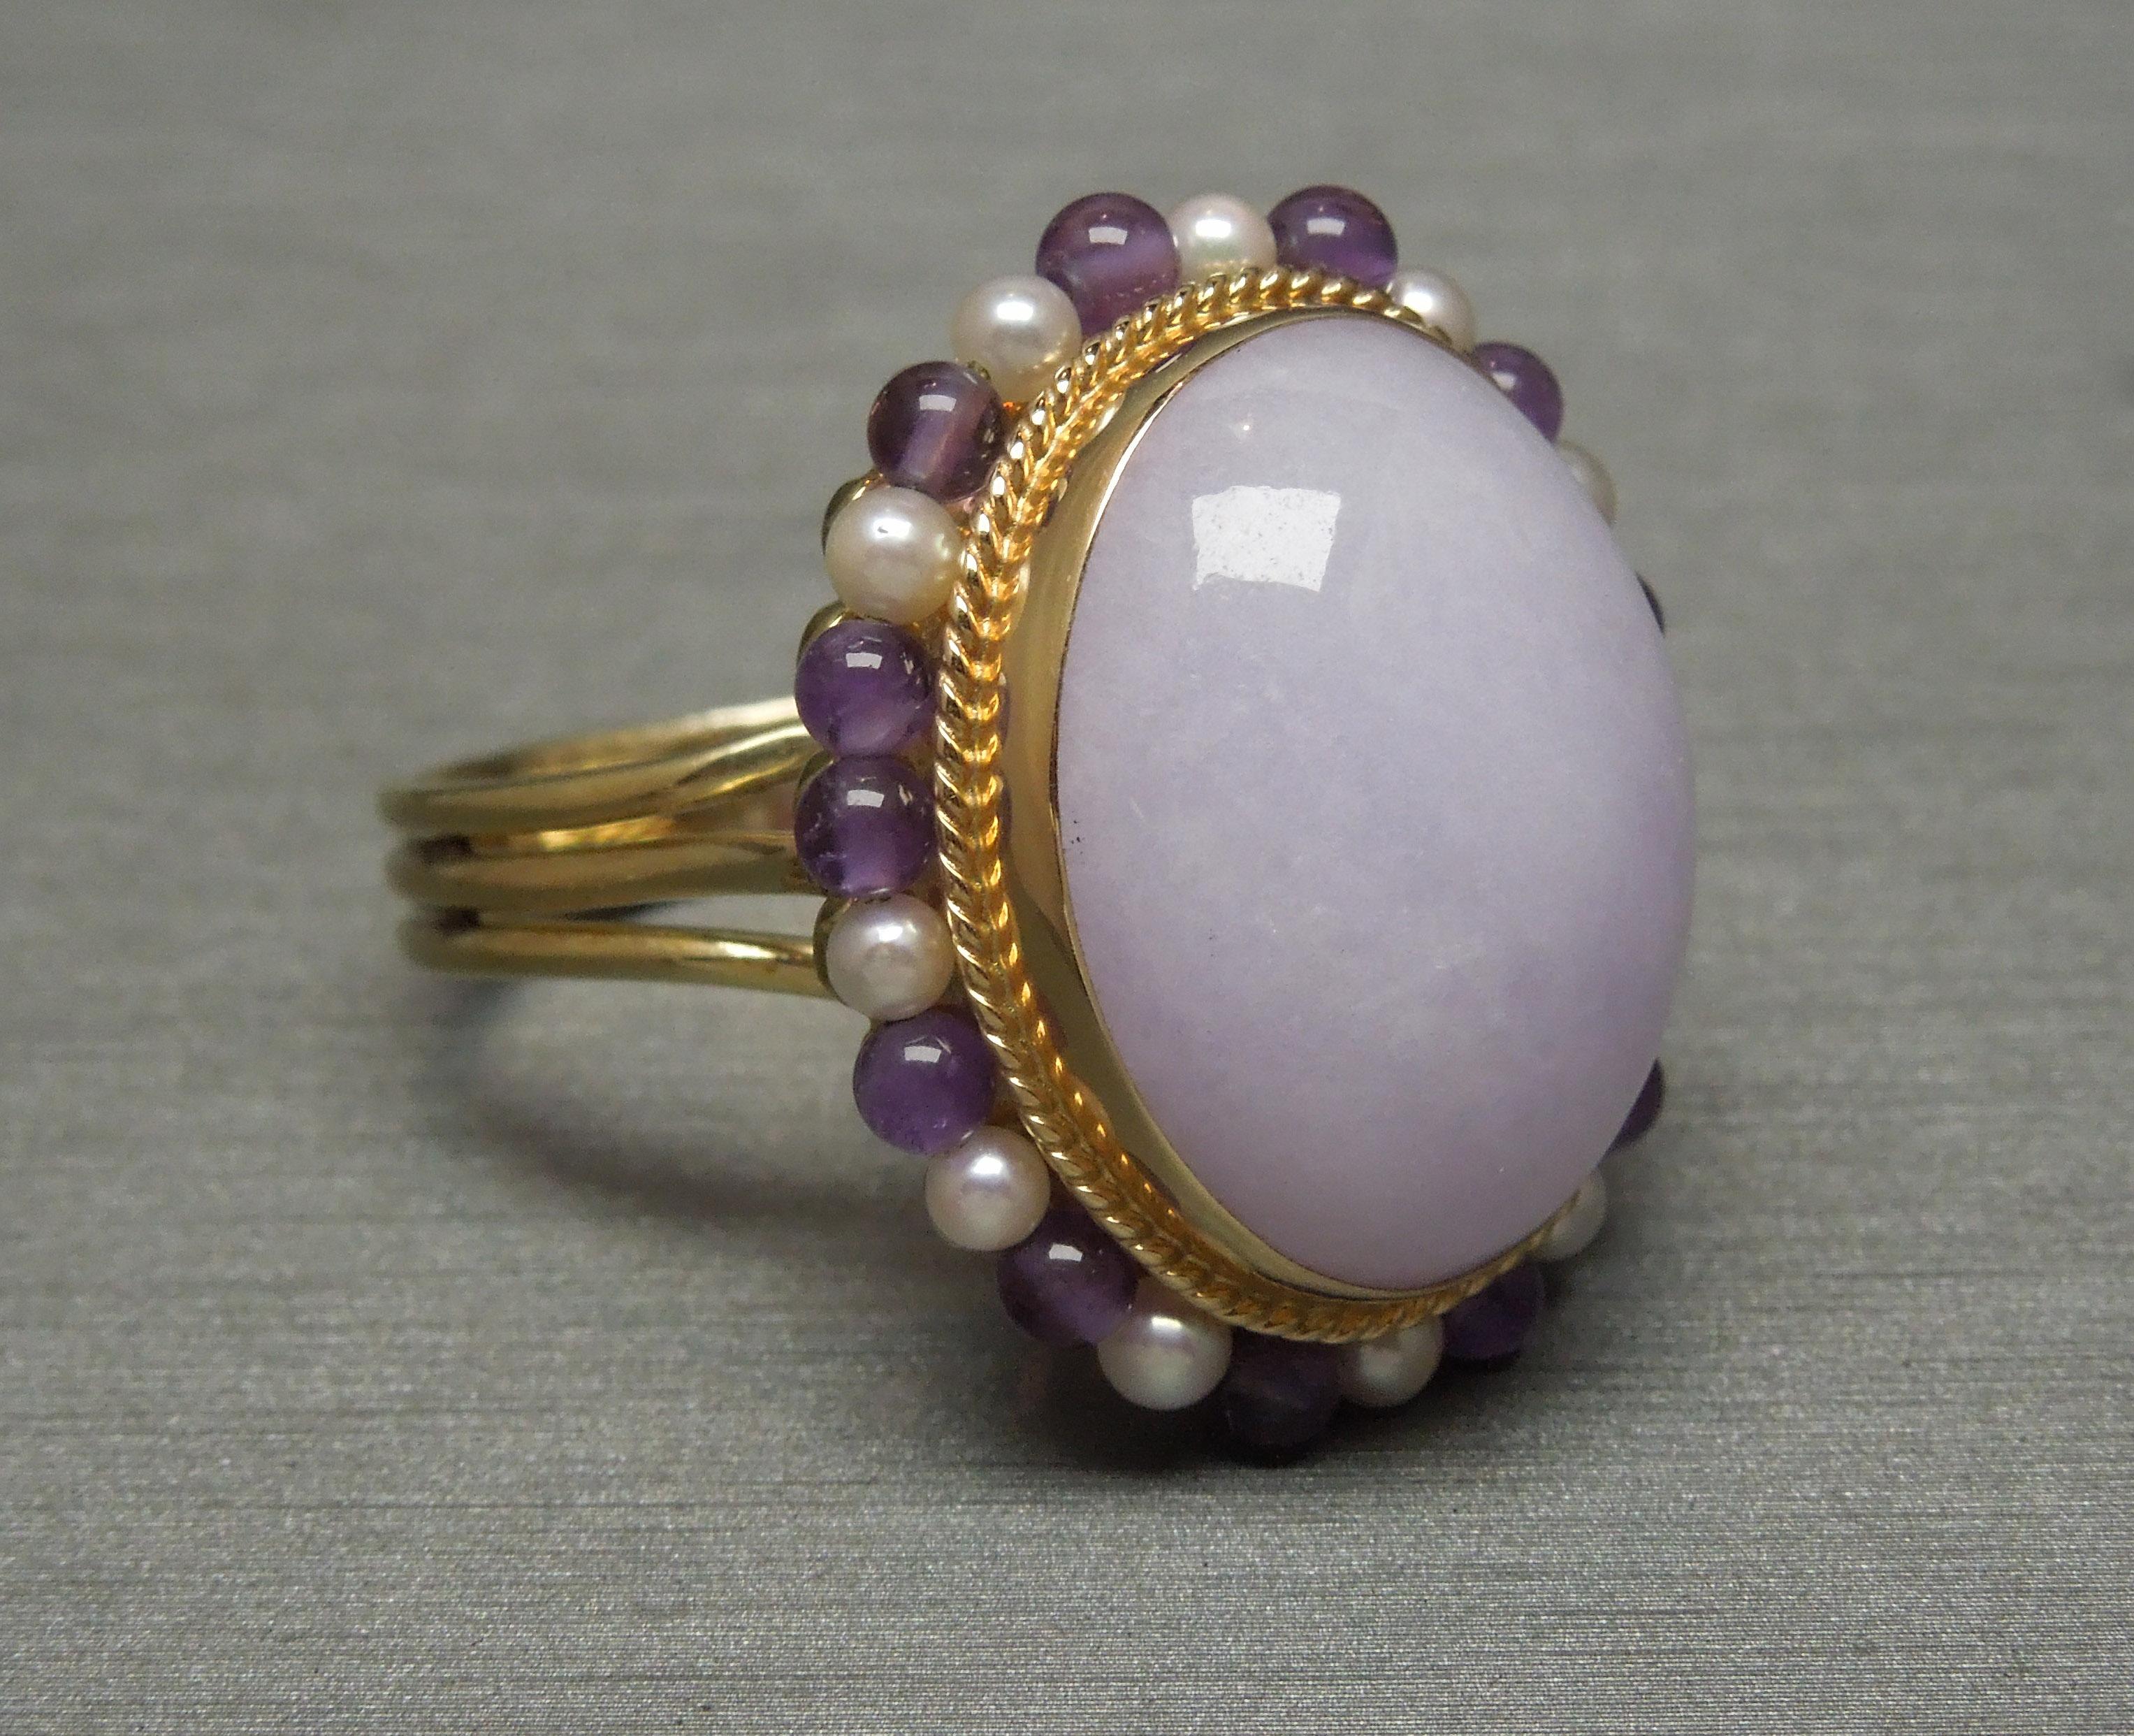 In a Hand-Fabricated British inspired mounting, with 1 central Bezel set Oval piece of Natural Lavender Jade. The most calming, tranquil shade of Jade. Known worldwide for its healing properties, securely [bezel] set in a prong-less setting. 
Found